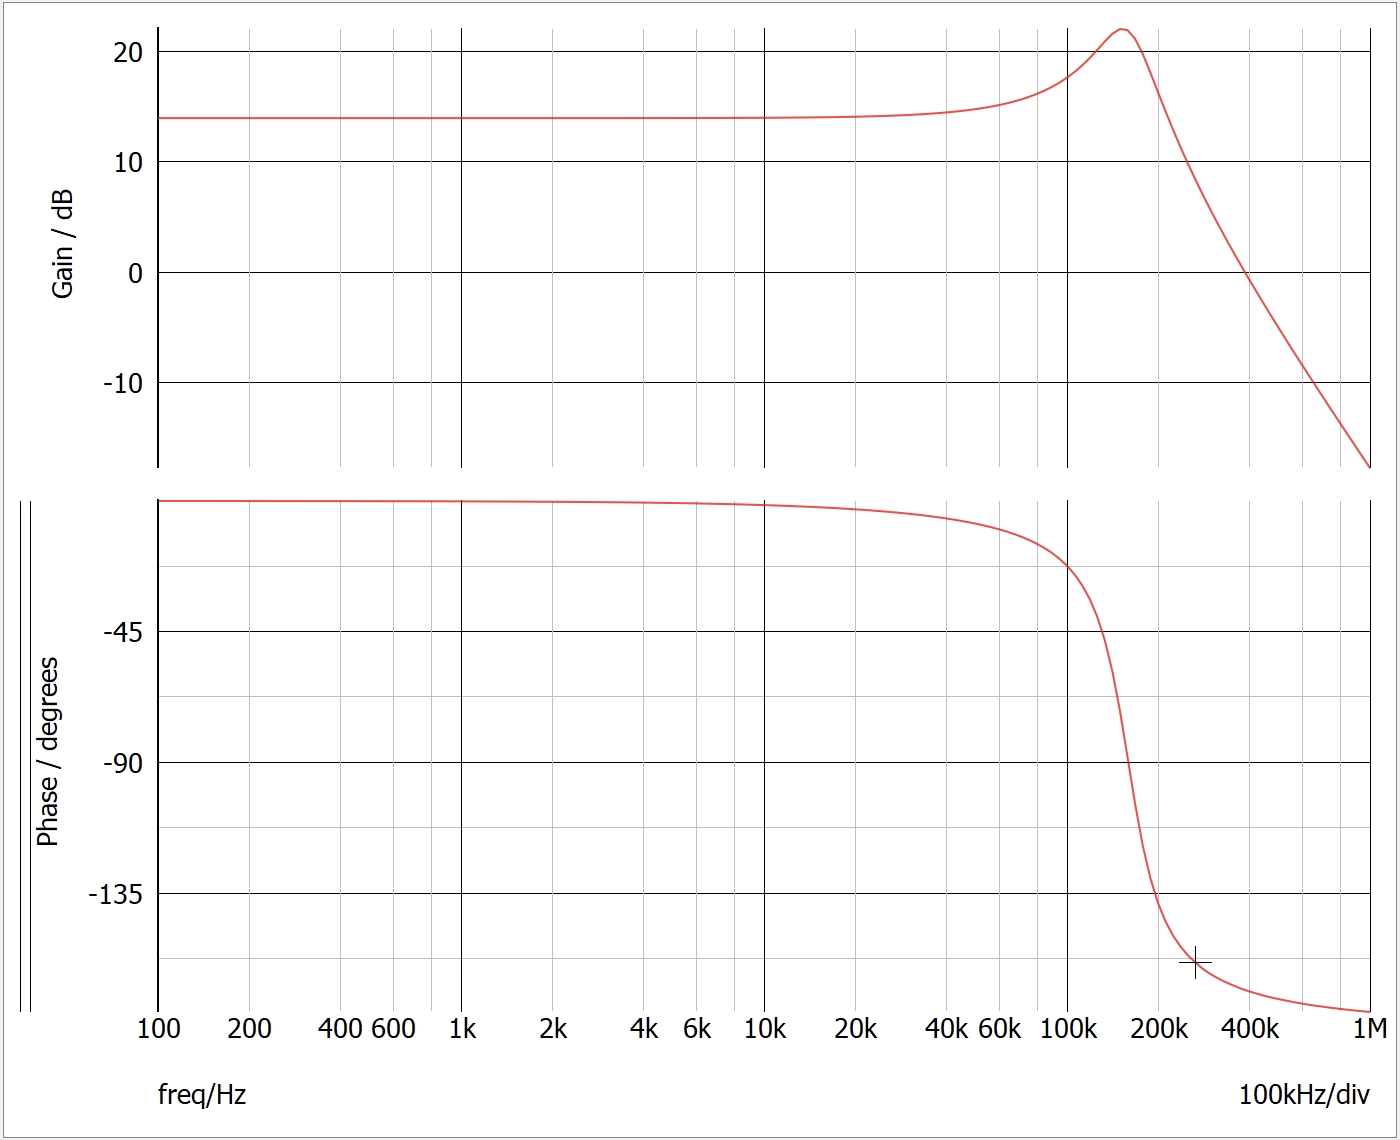 Gvd simulation results - resistive load